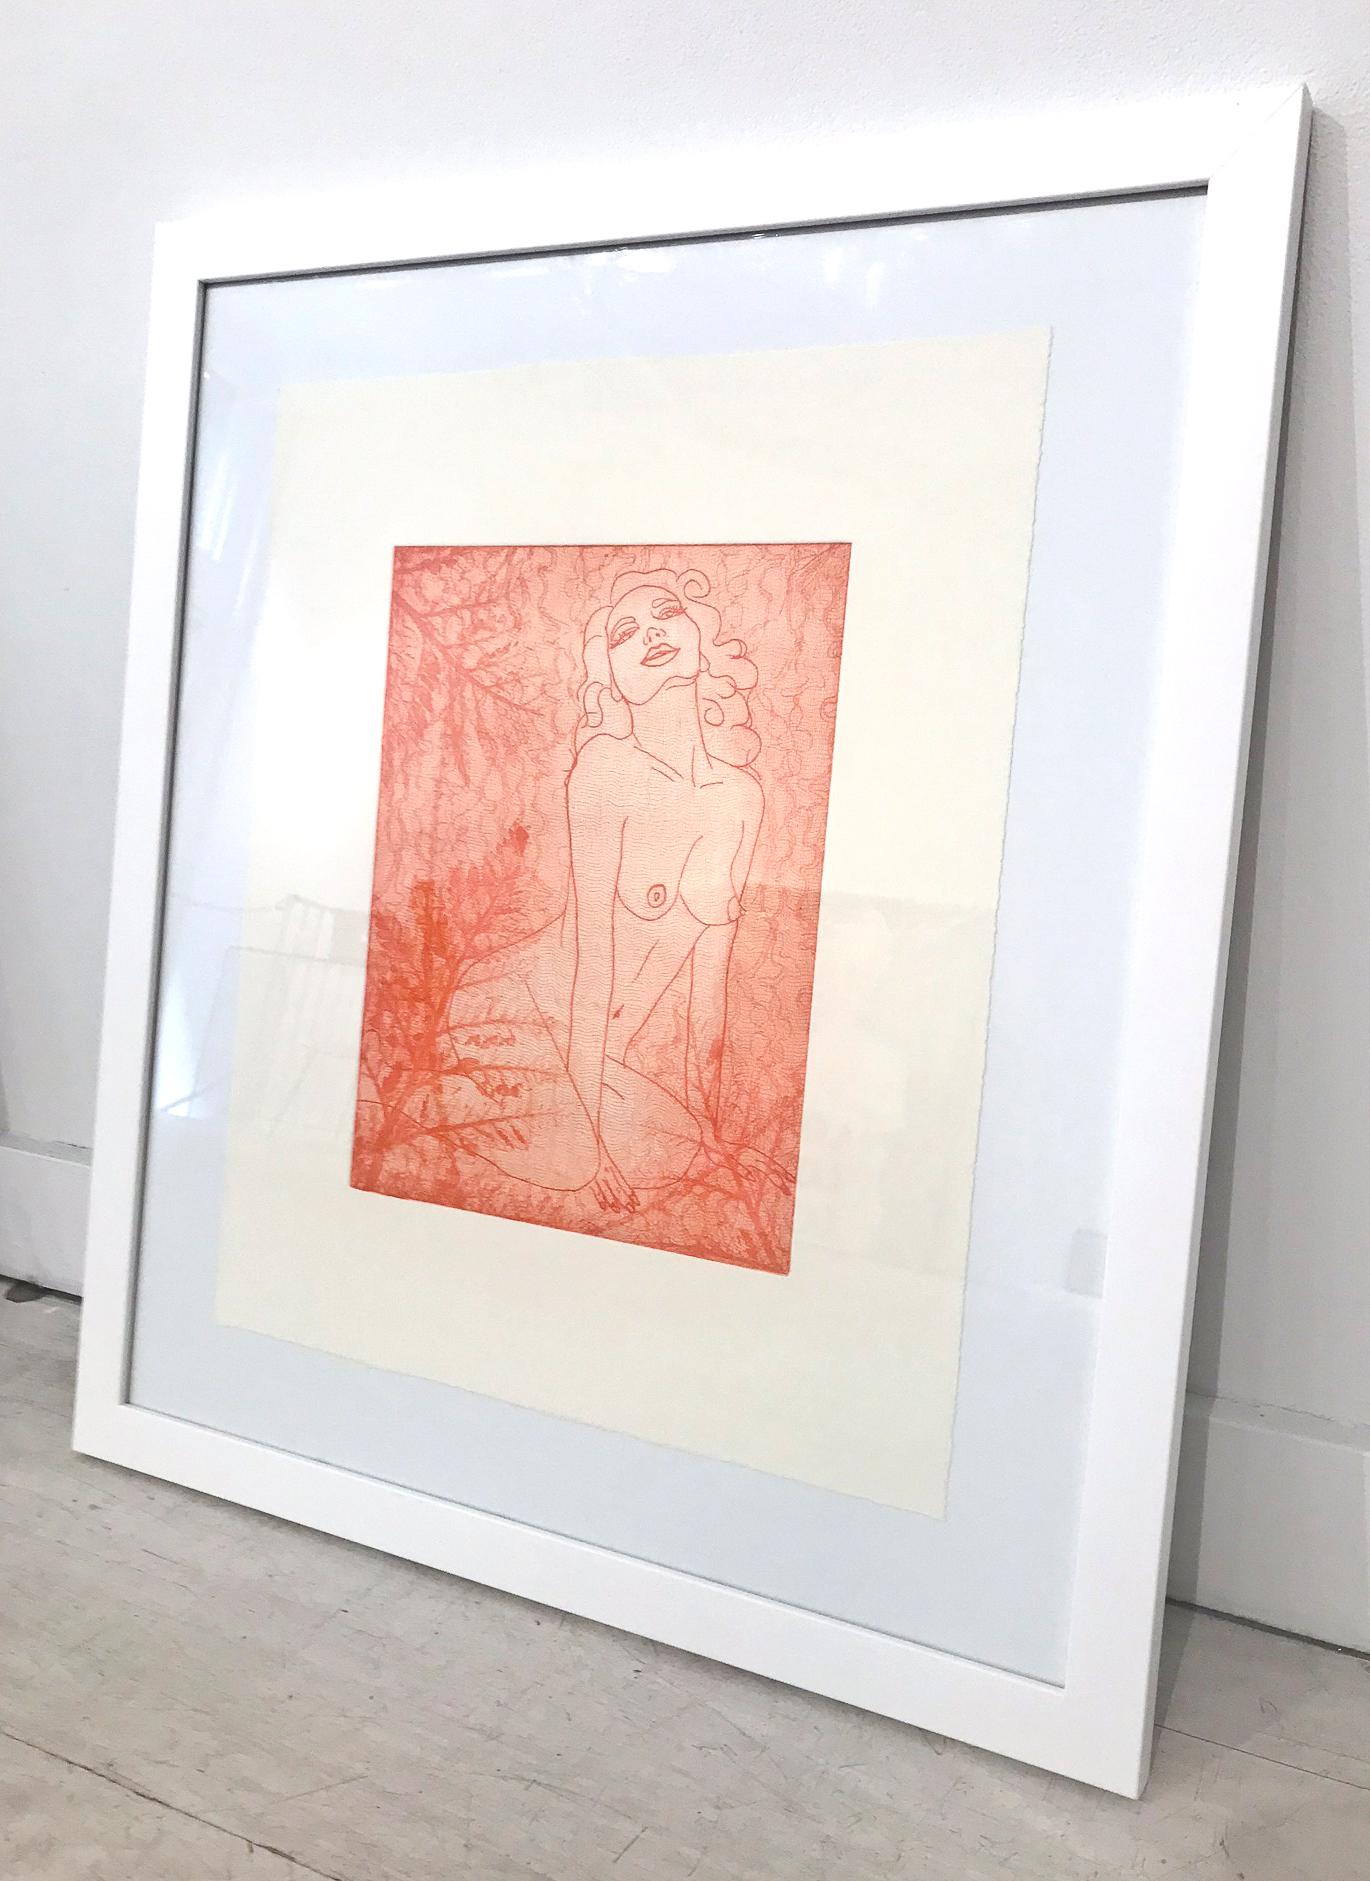 Each print is hand inked and hand printed by the artist, signed and numbered as well as includes a certificate of authenticity. Each print has subtle variations in the orange ink color due to hand printing, making each work of the edition unique.